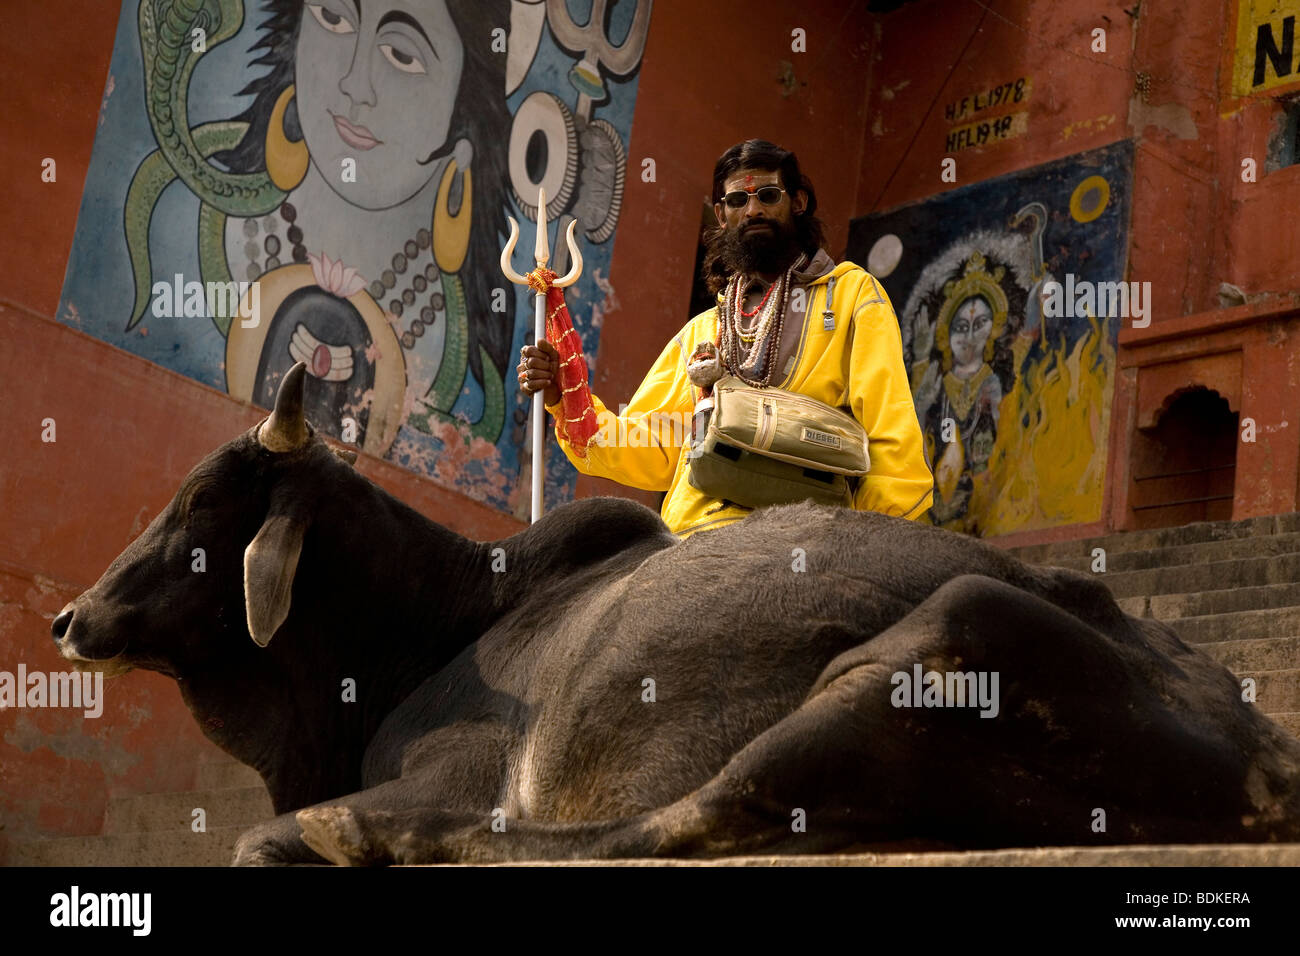 A Sadhu holds a trident and stands on steps (ghats) in the Indian city of Varanasi (Benares). A cow sits next to him. Stock Photo